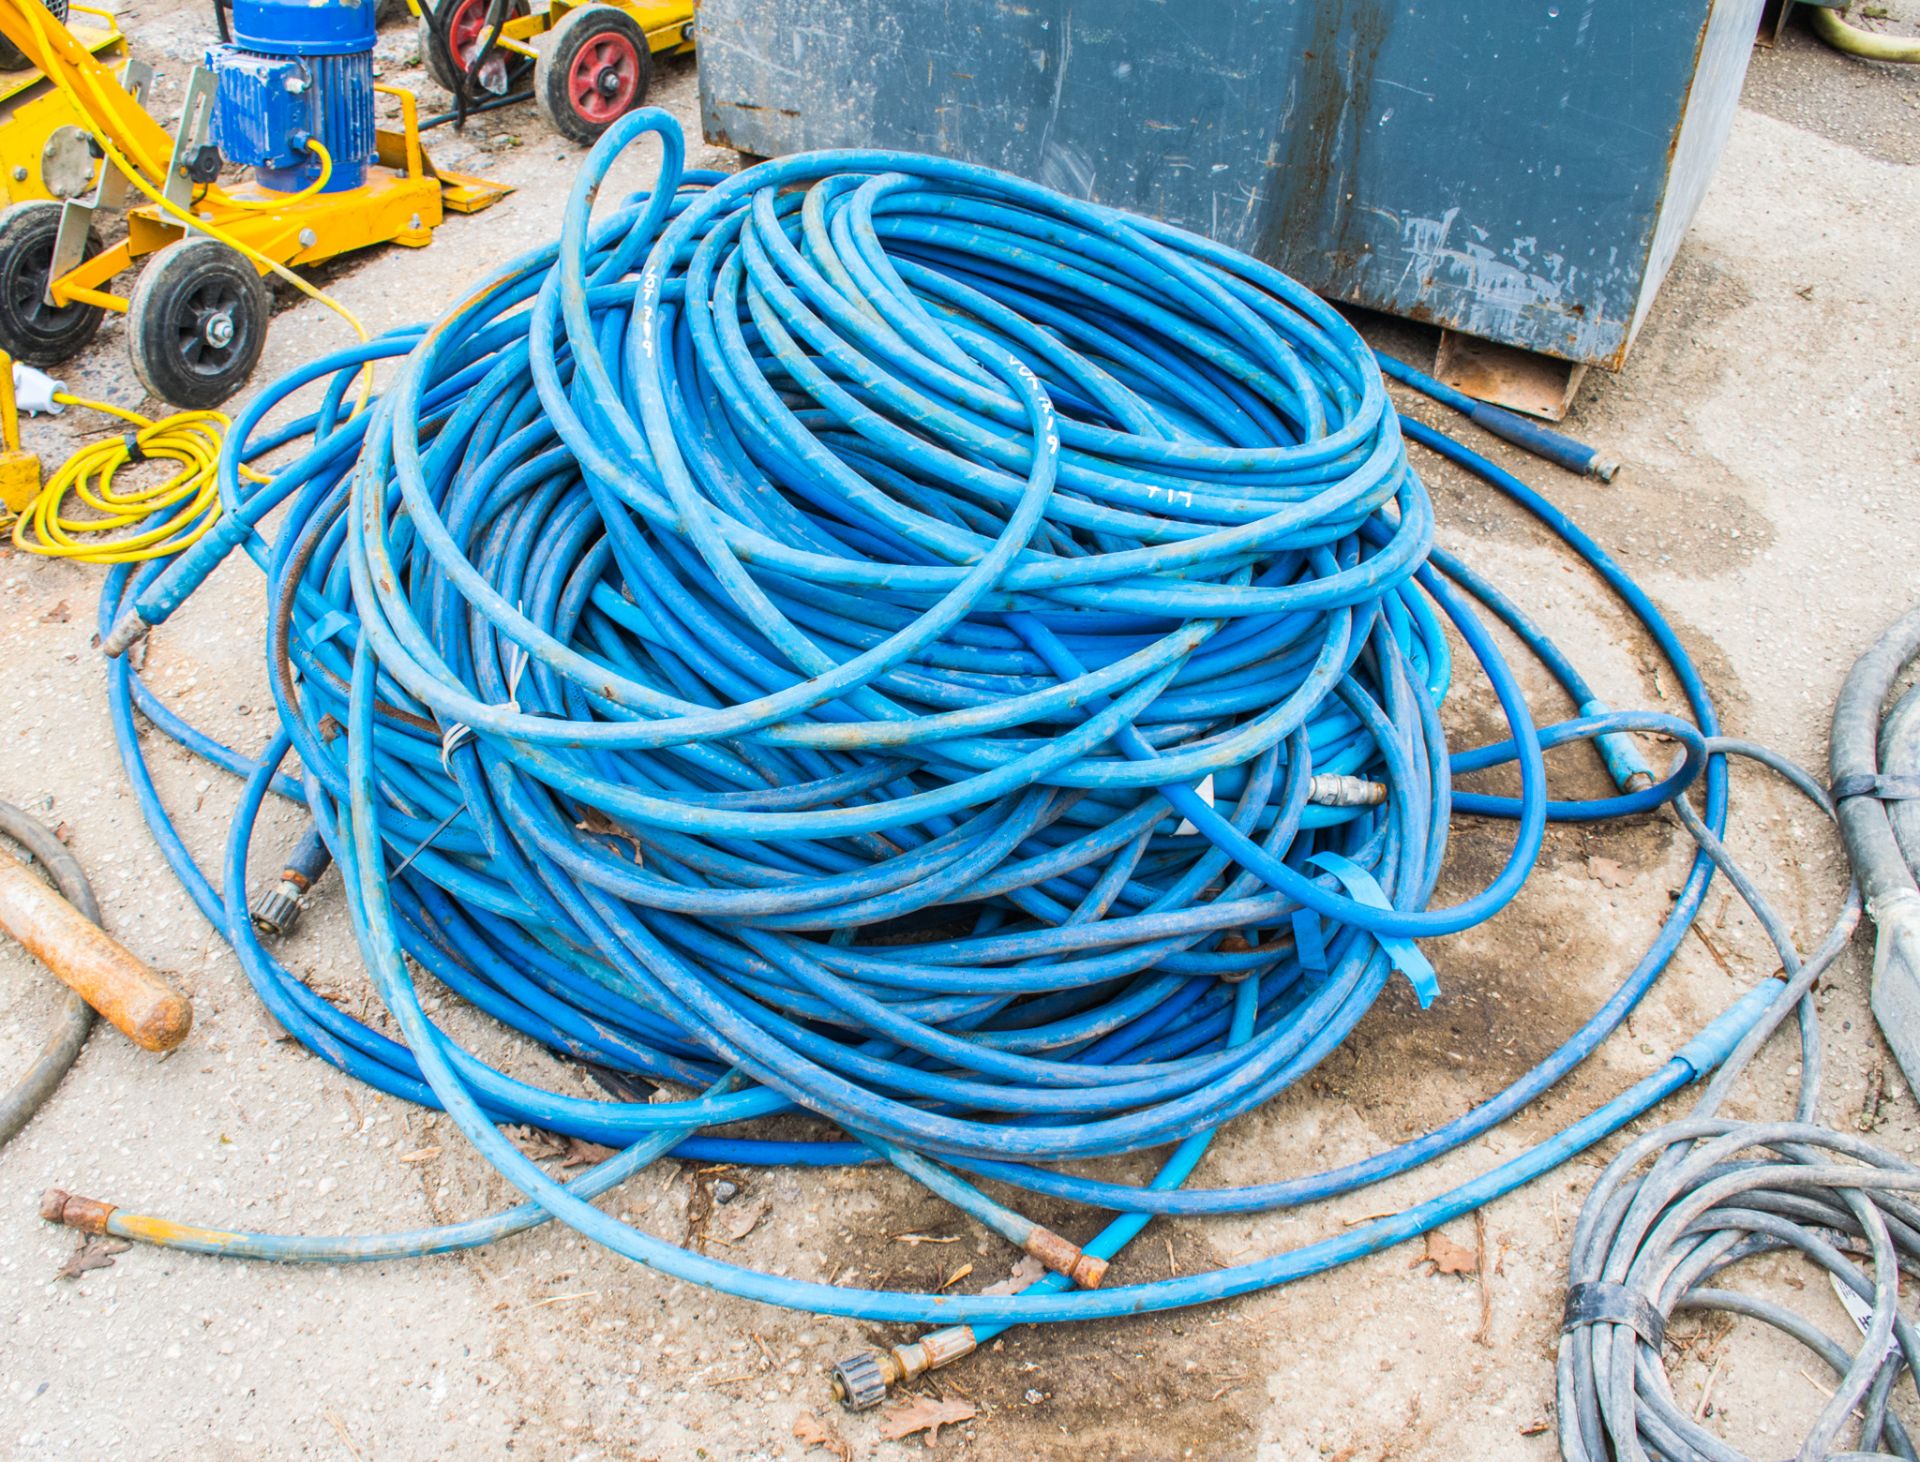 Quantity of pressure washer hose as lotted